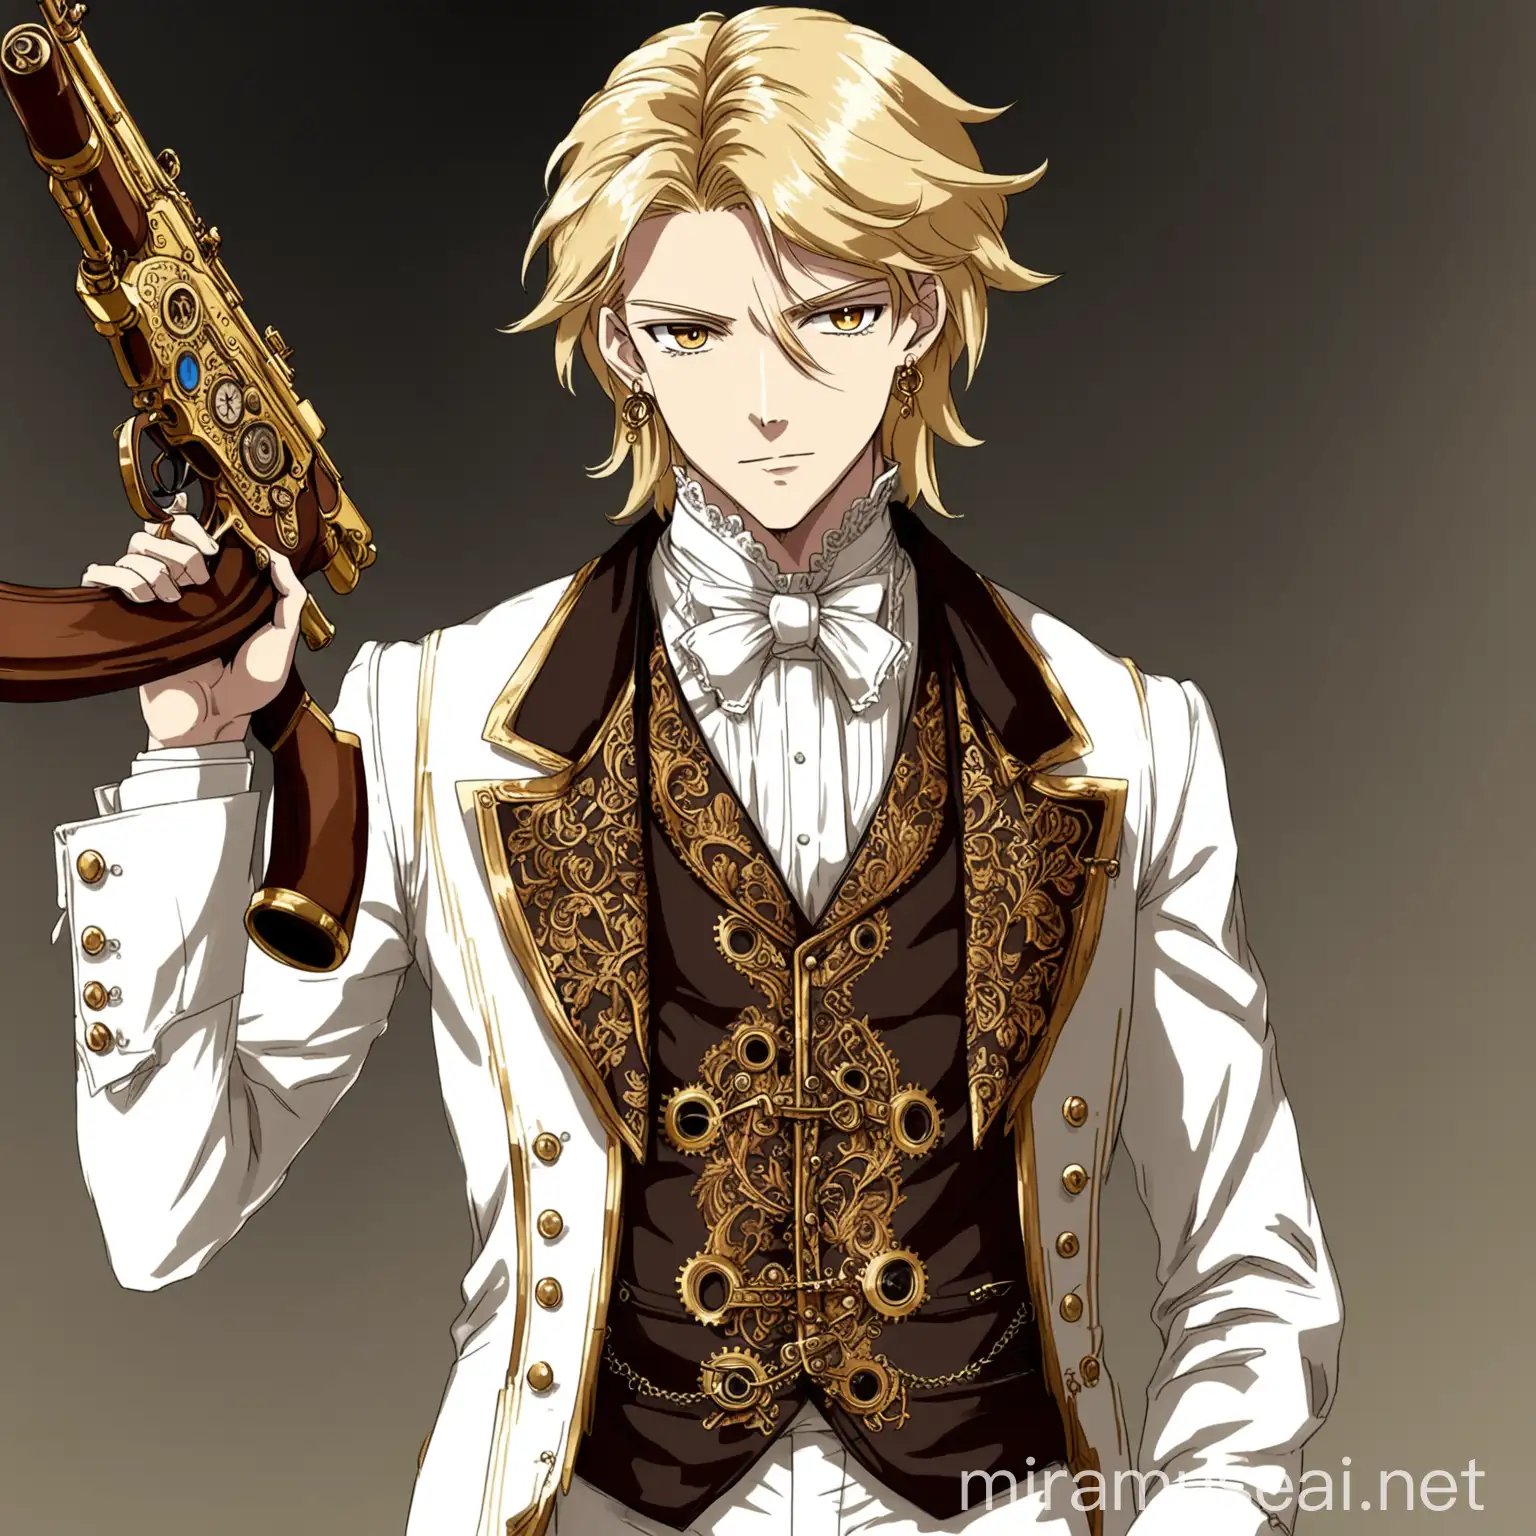 A sophisticated young man, dressed in a stylish (((Victorian-inspired waistcoat))), with intricate gold embroidery and a luxurious ((white Victorian suit)), tousled blonde hair artfully lifted at the fringe, adorned with colorful dangling earrings and rings, holding a sleek (steampunk rifle) casually, with a cocky yet rebellious aura. in anime